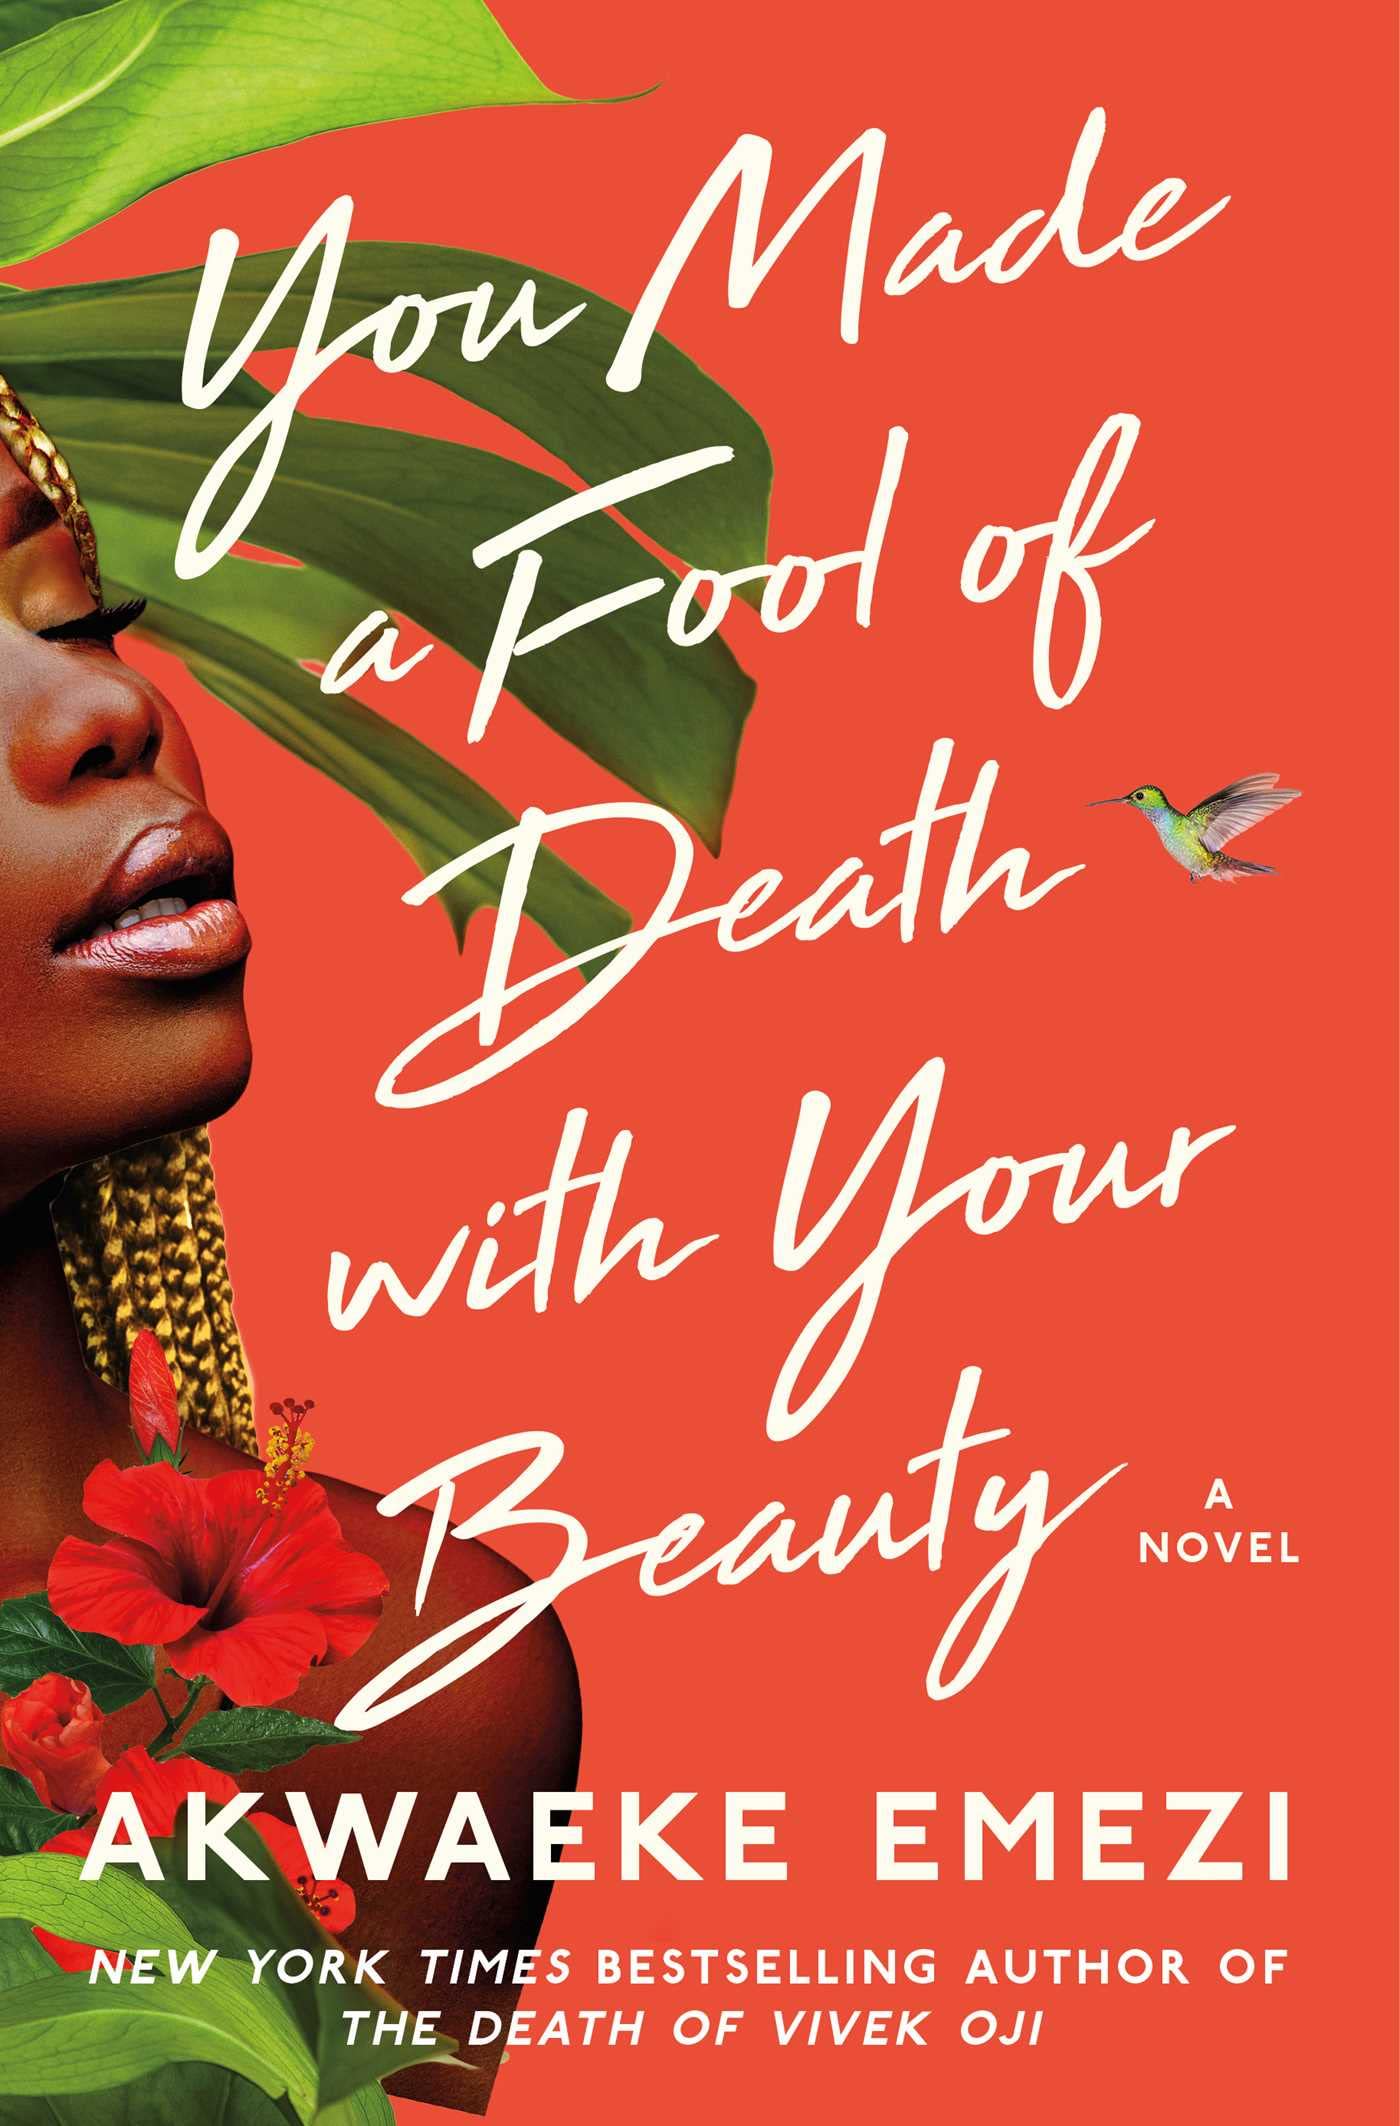 Image for "You Made a Fool of Death with Your Beauty"